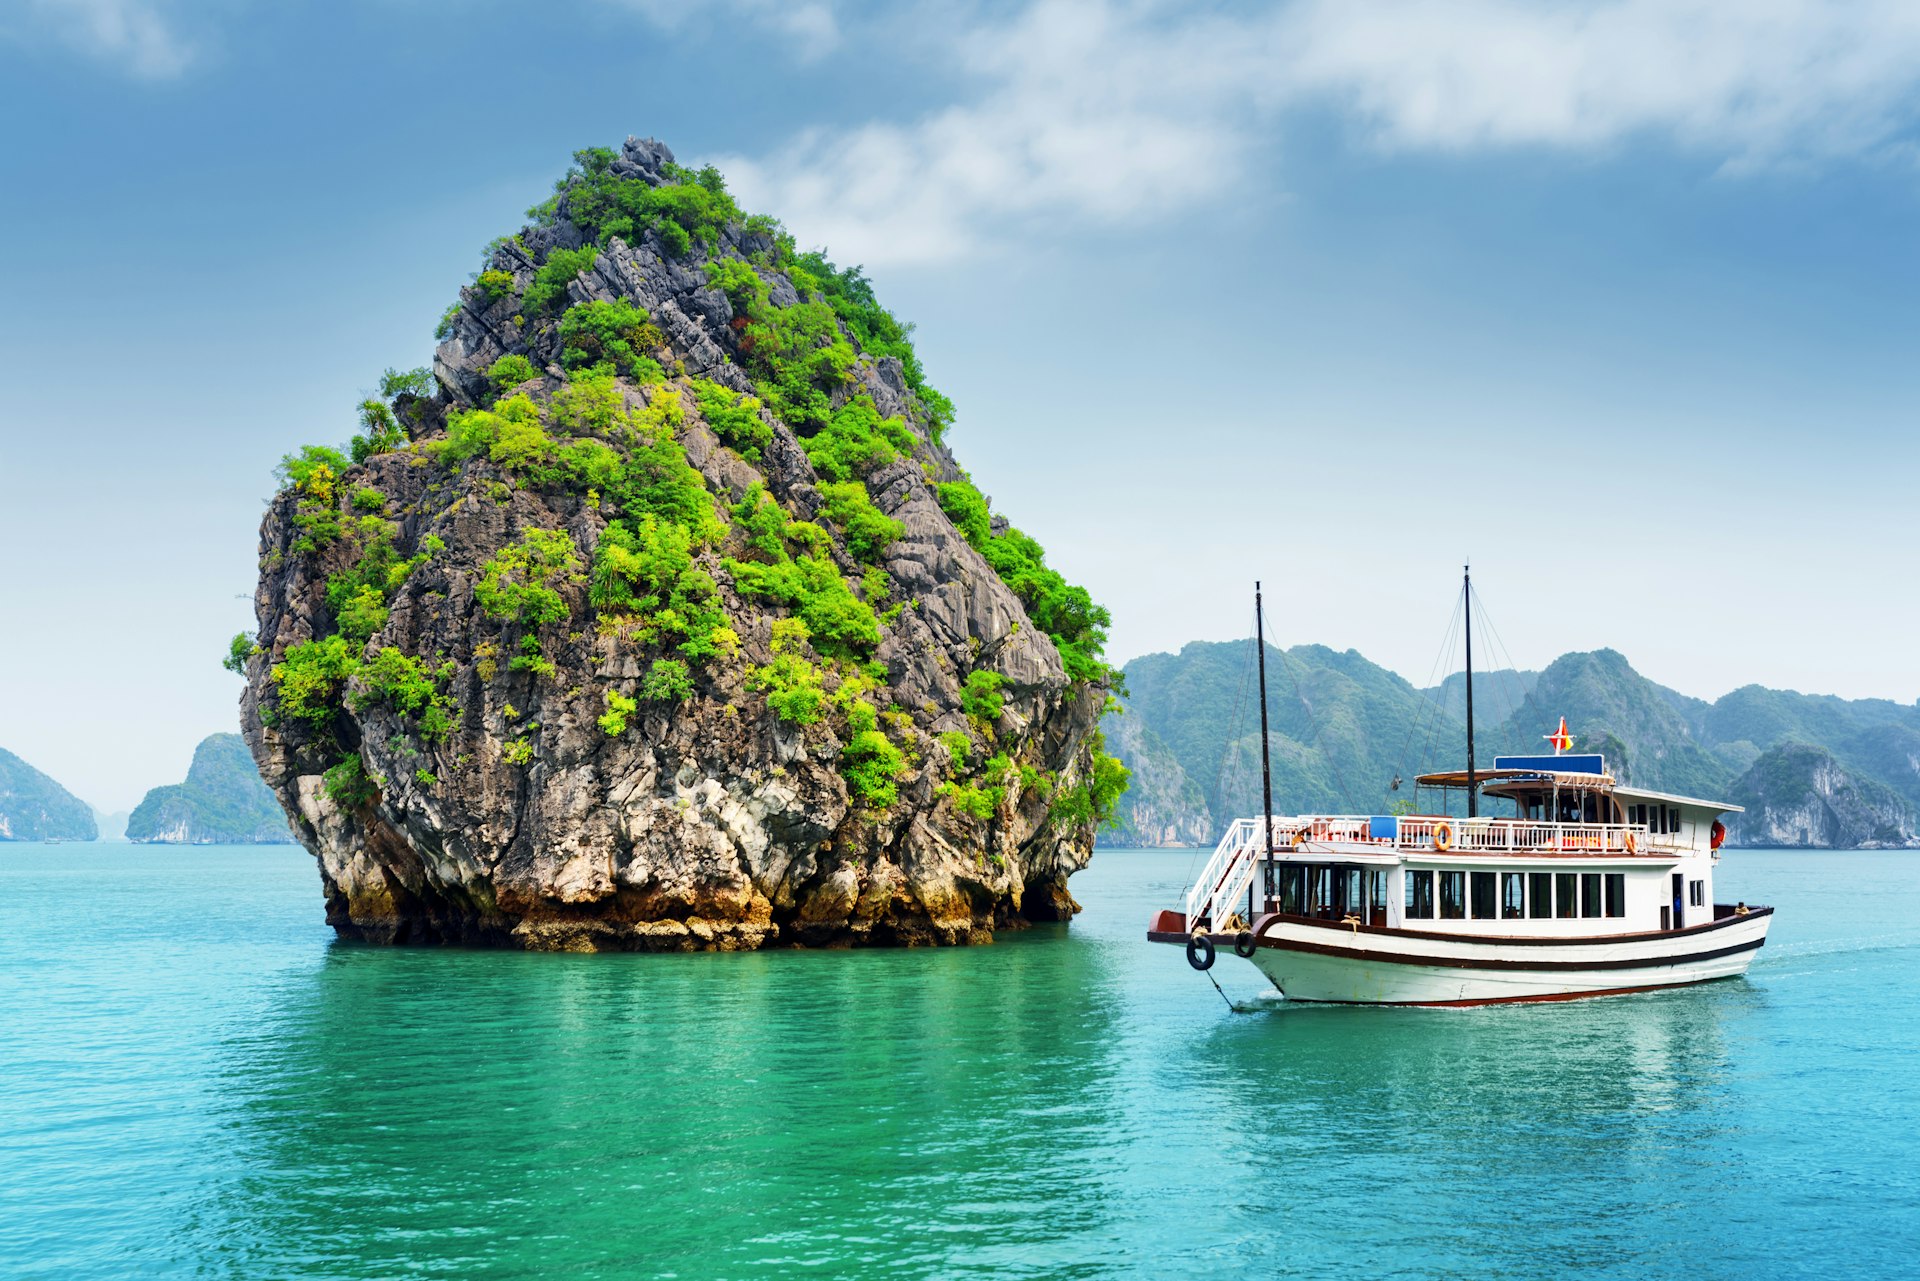 Beautiful view of karst isle and tourist boat in the Ha Long Bay (Descending Dragon Bay) at the Gulf of Tonkin of the South China Sea, Vietnam. The Halong Bay is a popular tourist destination of Asia